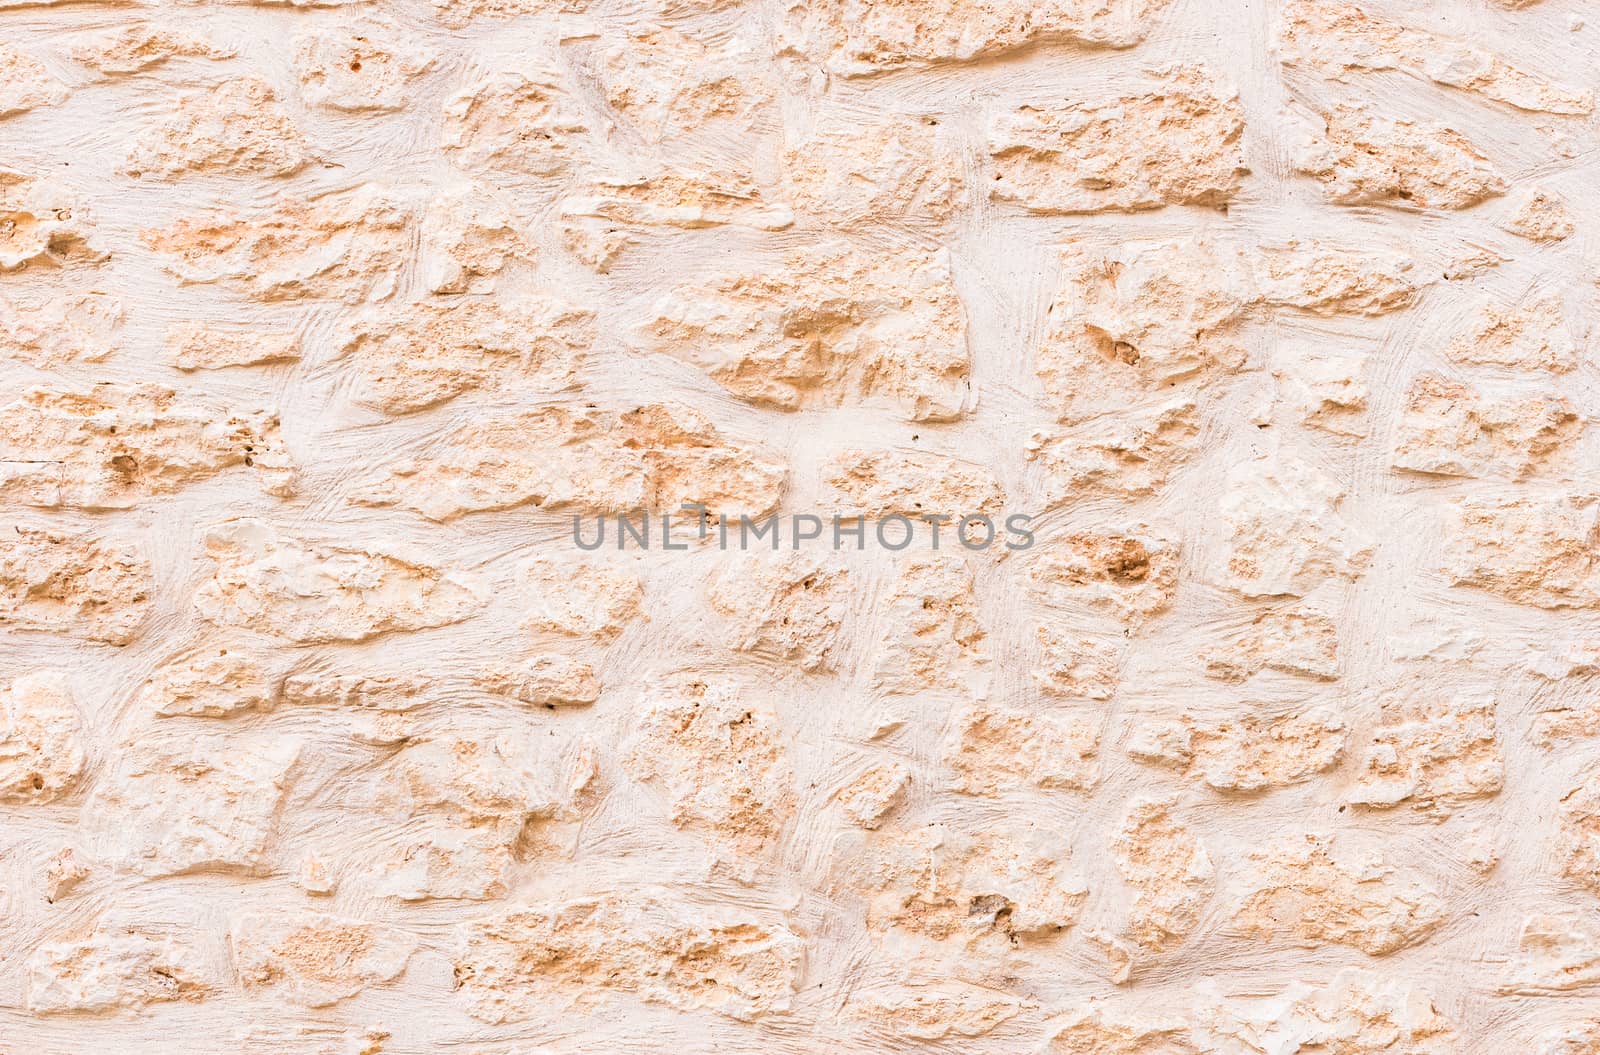 Rustic old stone wall texture background structure